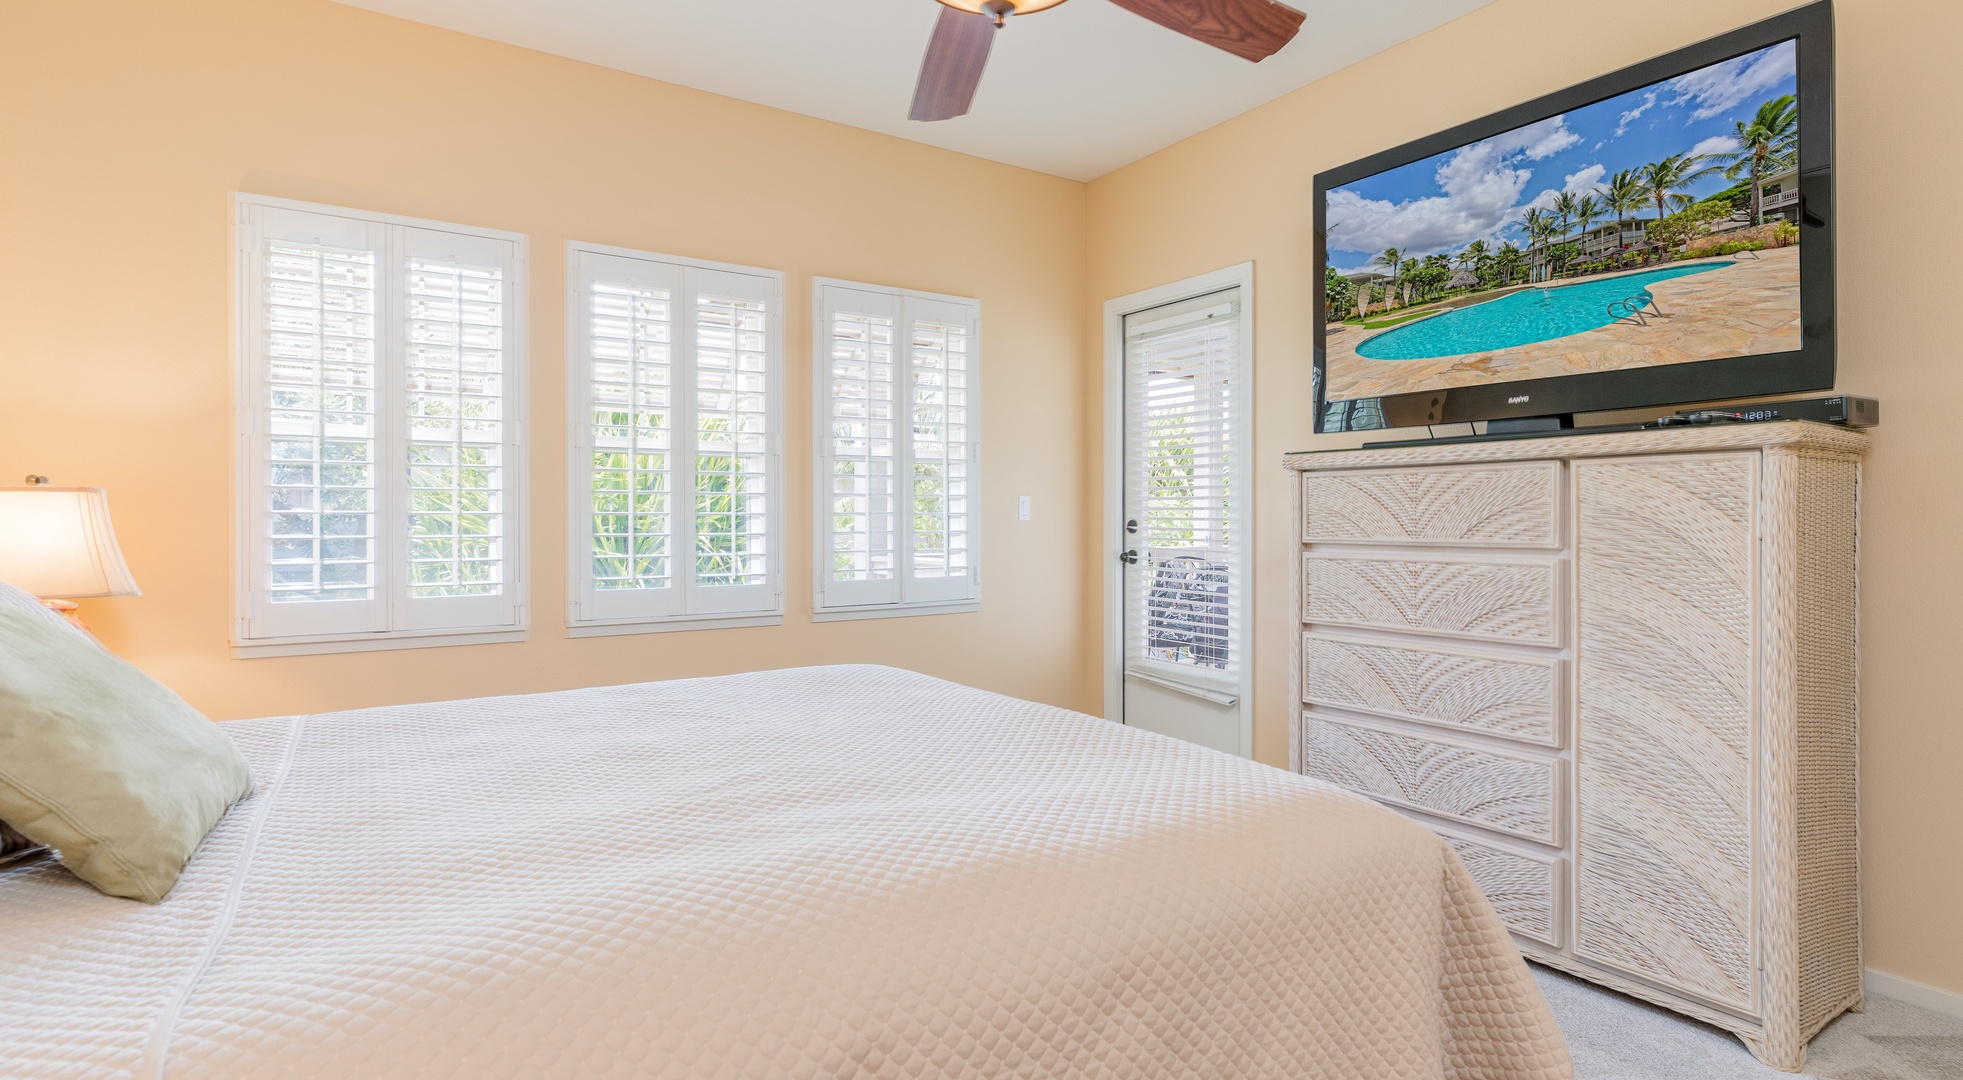 Kapolei Vacation Rentals, Coconut Plantation 1192-4 - The primary guest bedroom with lanai access and a TV.